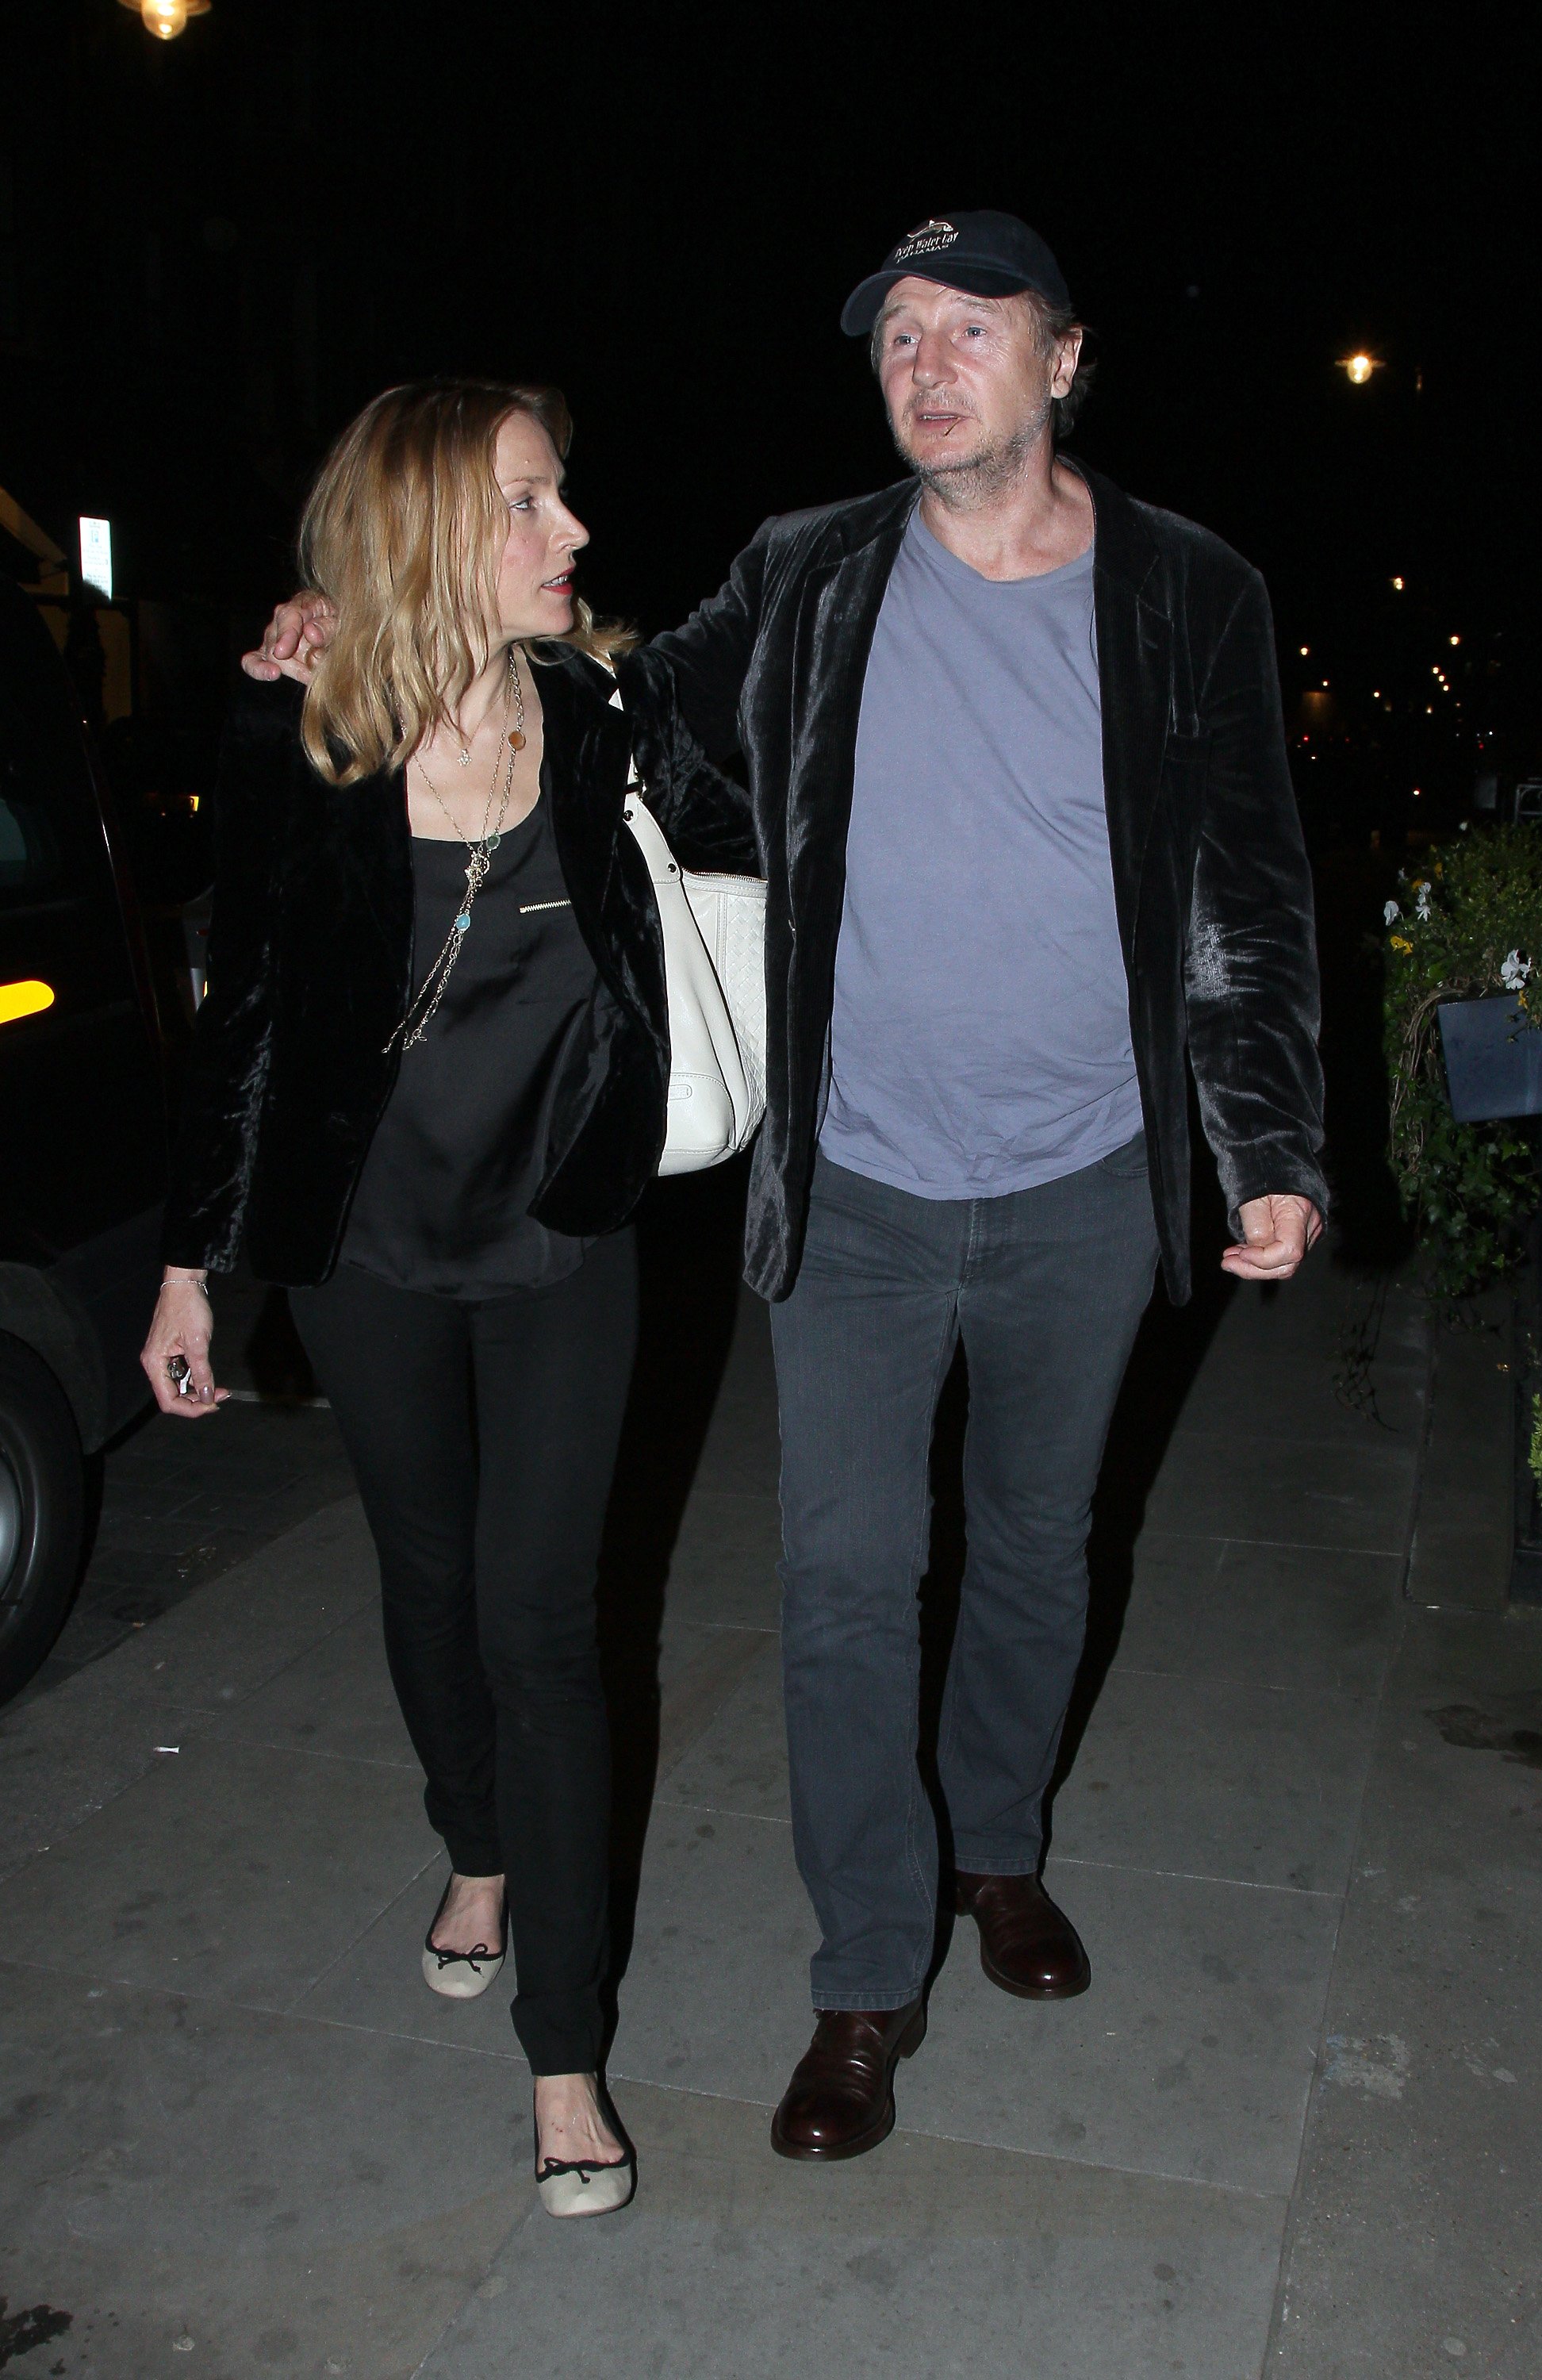 Businesswoman Freya St. Johnston and Liam Neeson at Scotts restaurant on March 30, 2012 in London, England. / Source: Getty Images